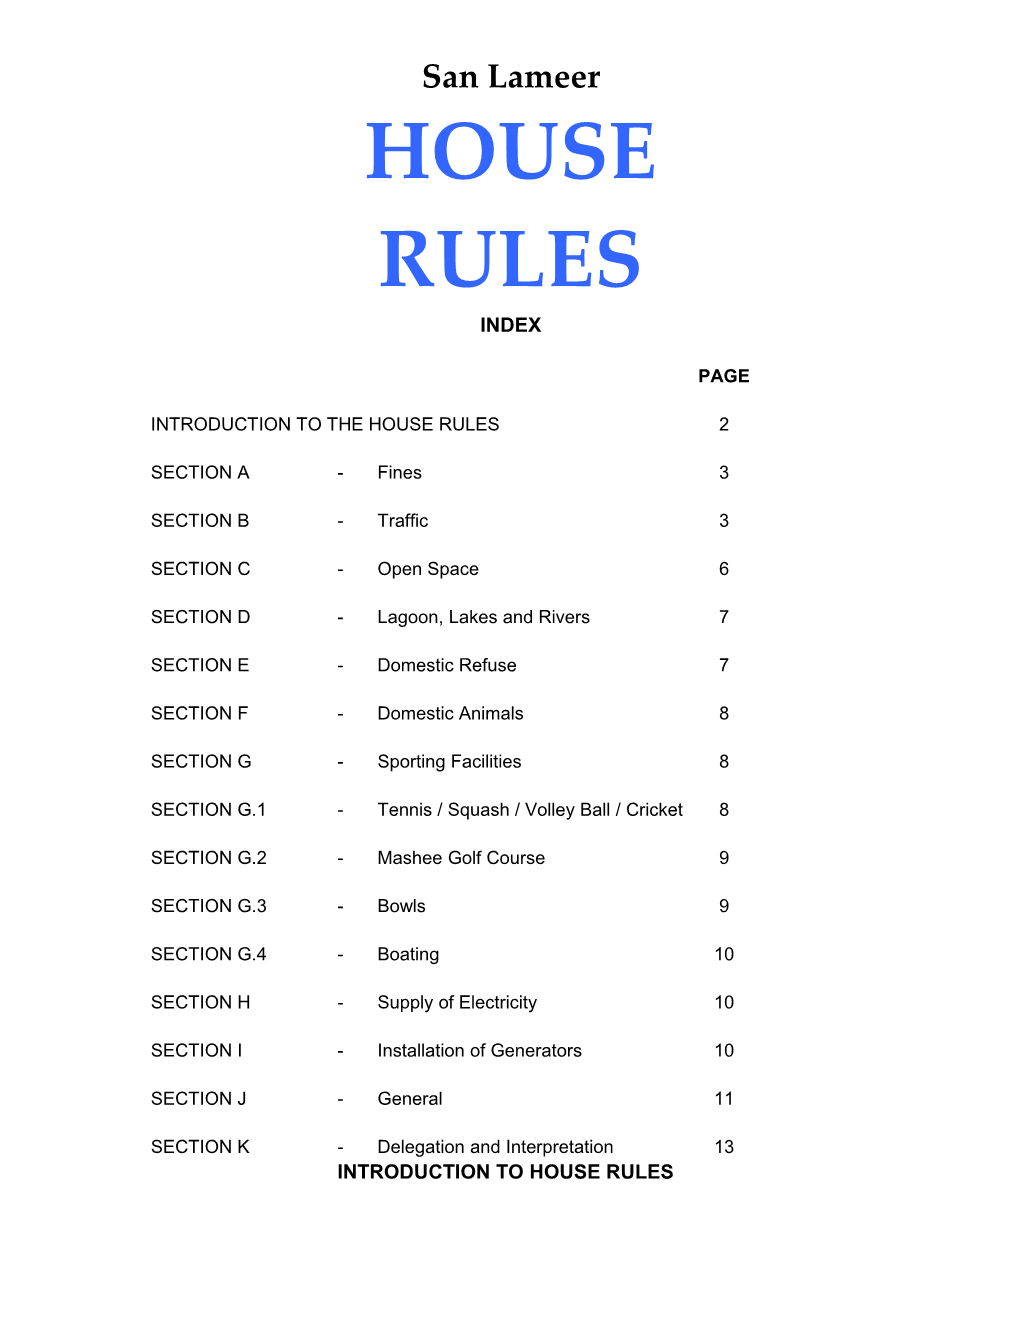 Introduction to the House Rules2